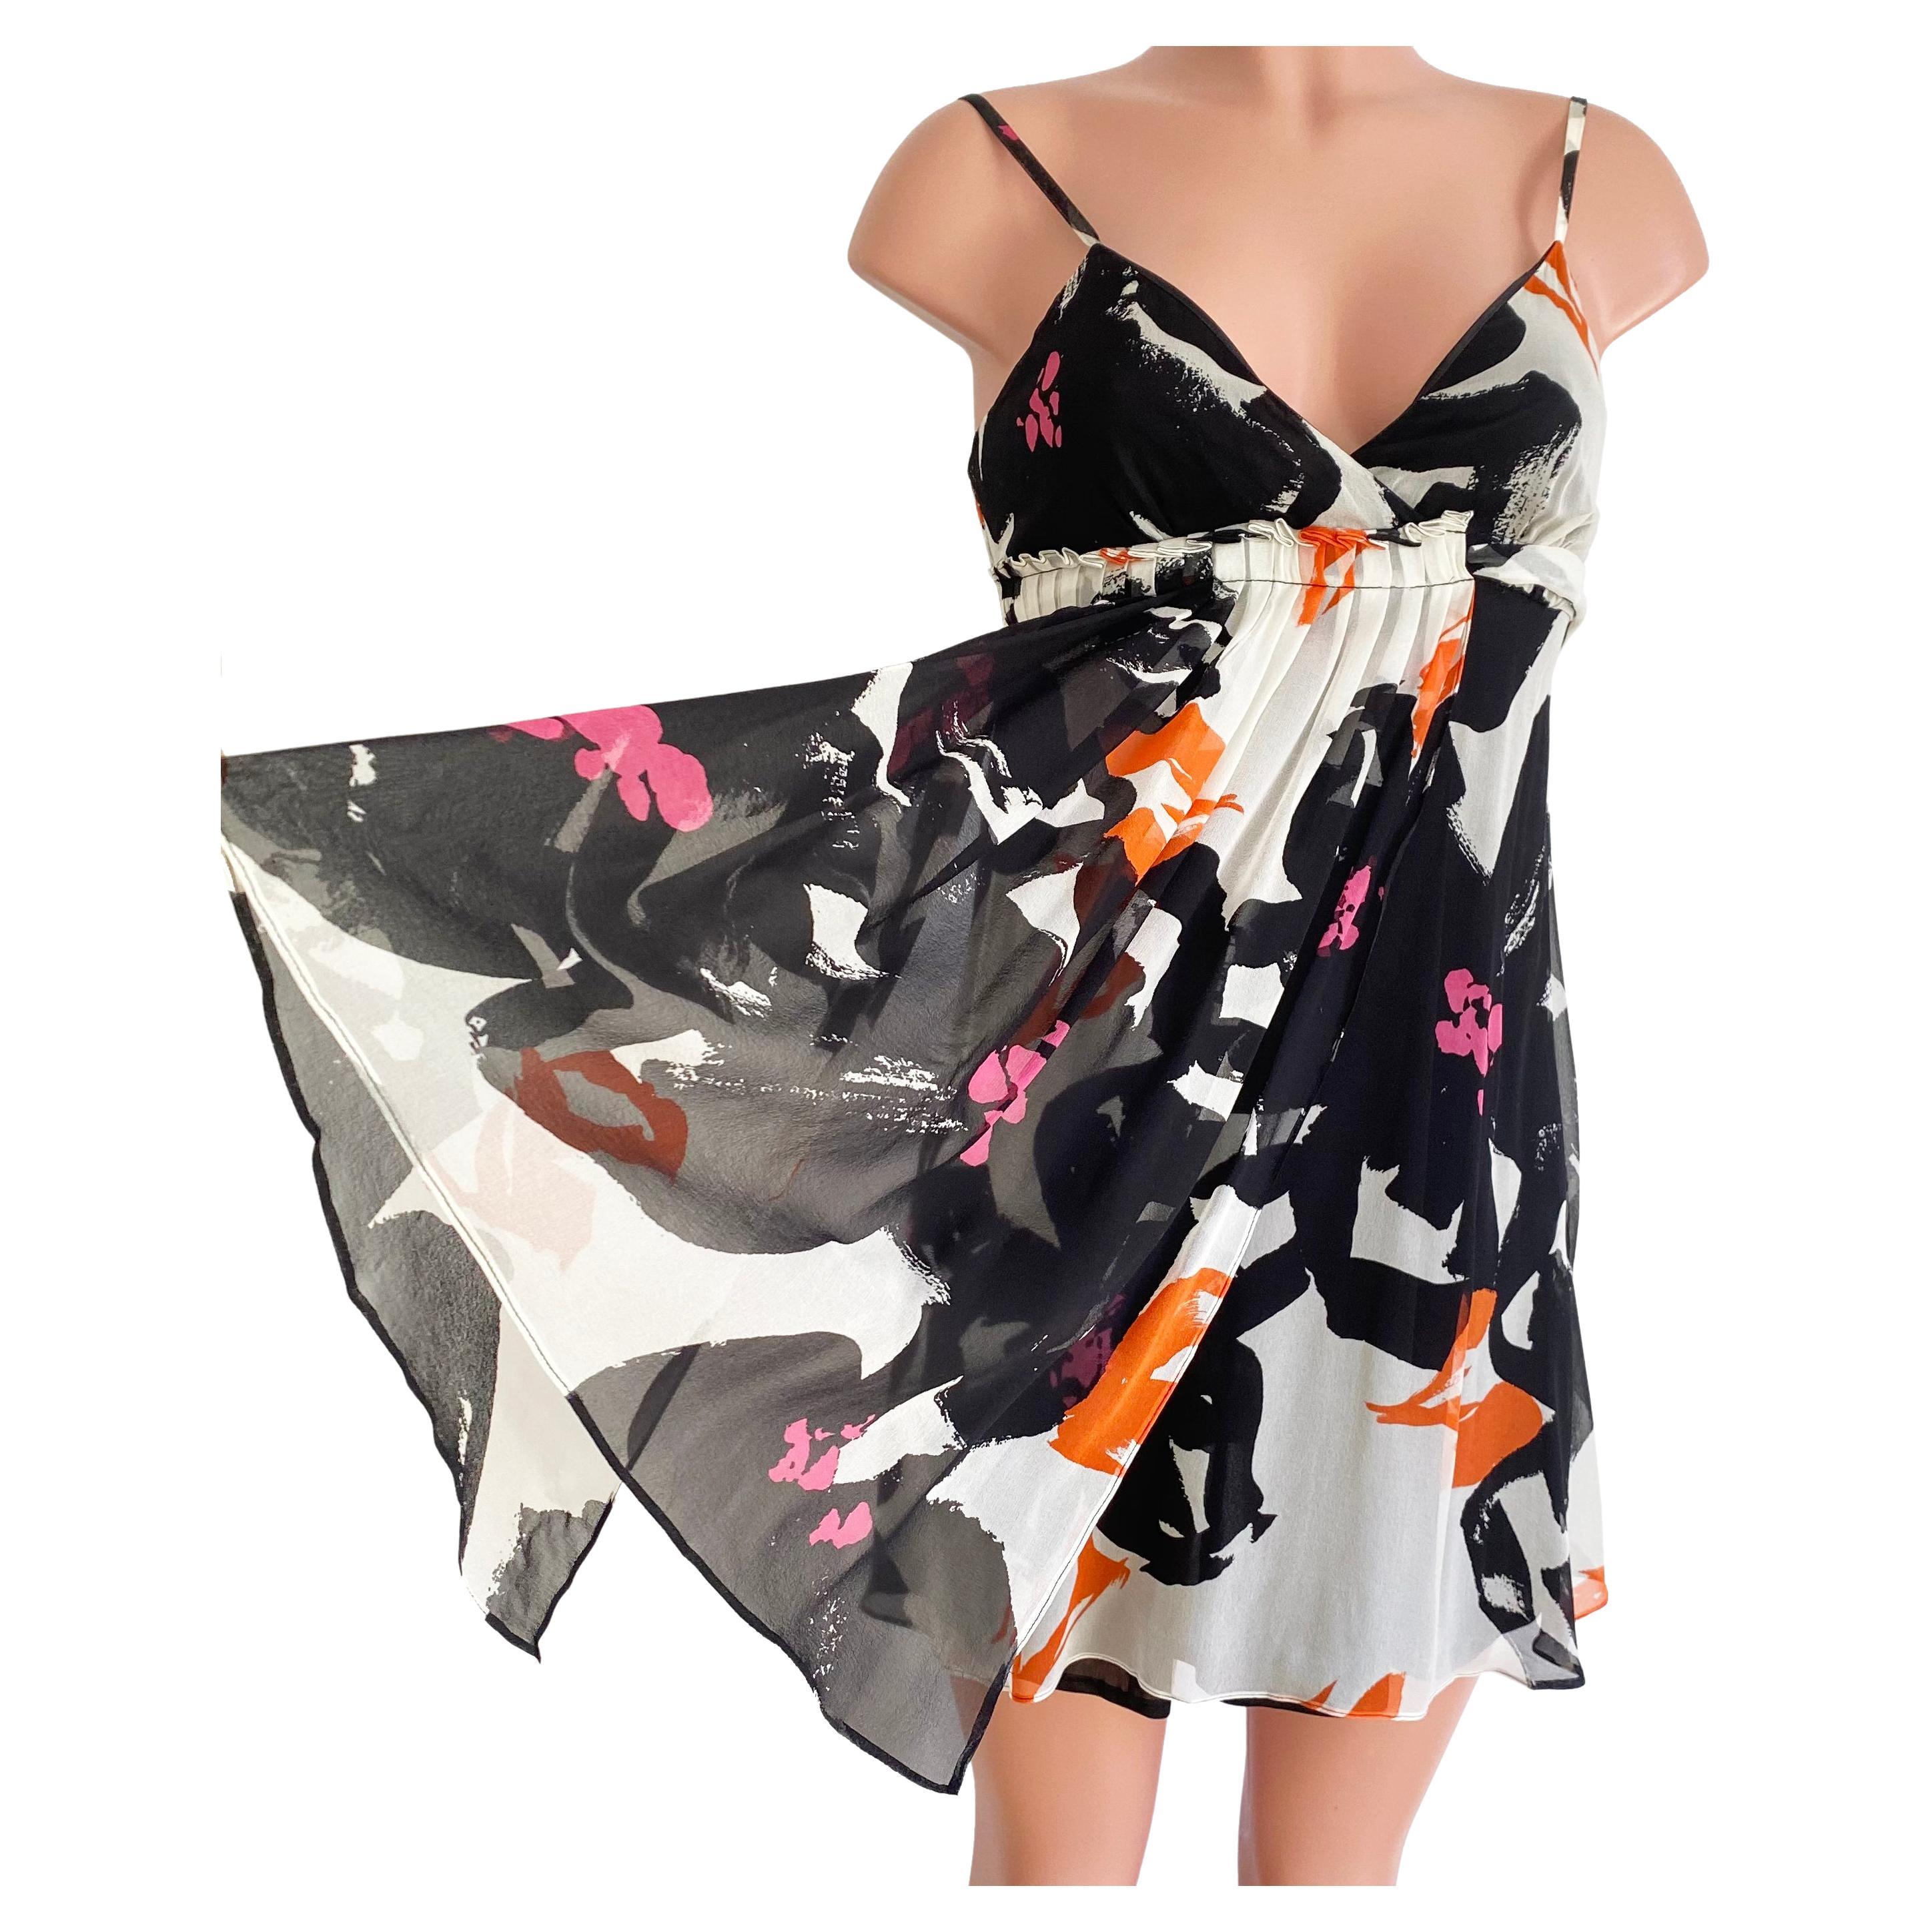 Black and orange red free-hand floral on white silk georgette.
Wear it on its own, with a cardigan or even a Biker jacket. With stilettos, flip flops, or ankle booties! 
This versatile little dress travels and packs beautifully and will make you the